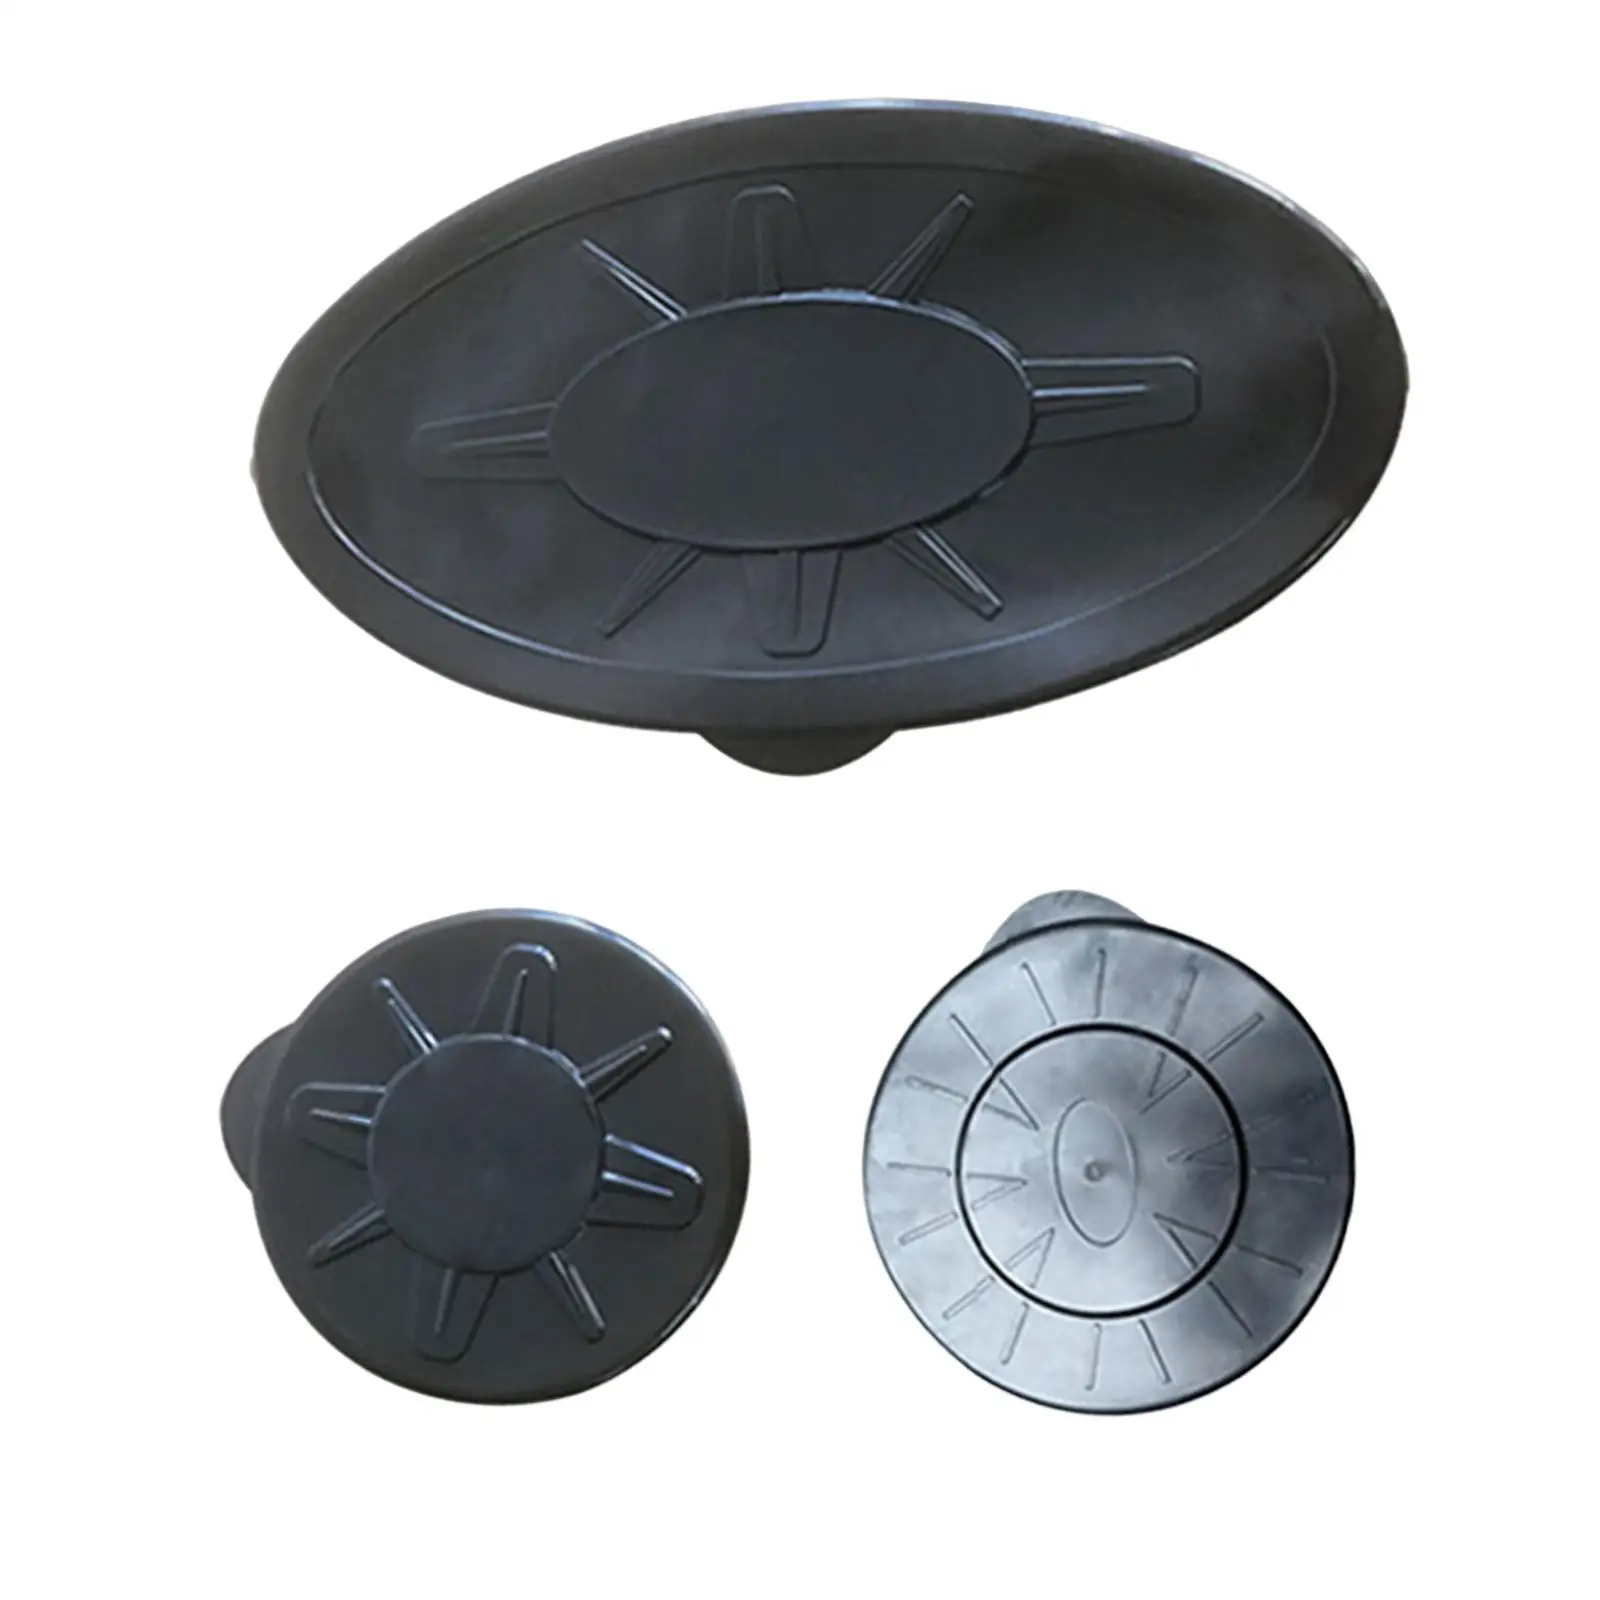 Kayak Hatches 9 inch Boat Sealing Hatch Parts Lock Hatch Round/Oval Deck Hatch Cover Replacement Hatches for Canoes Marine